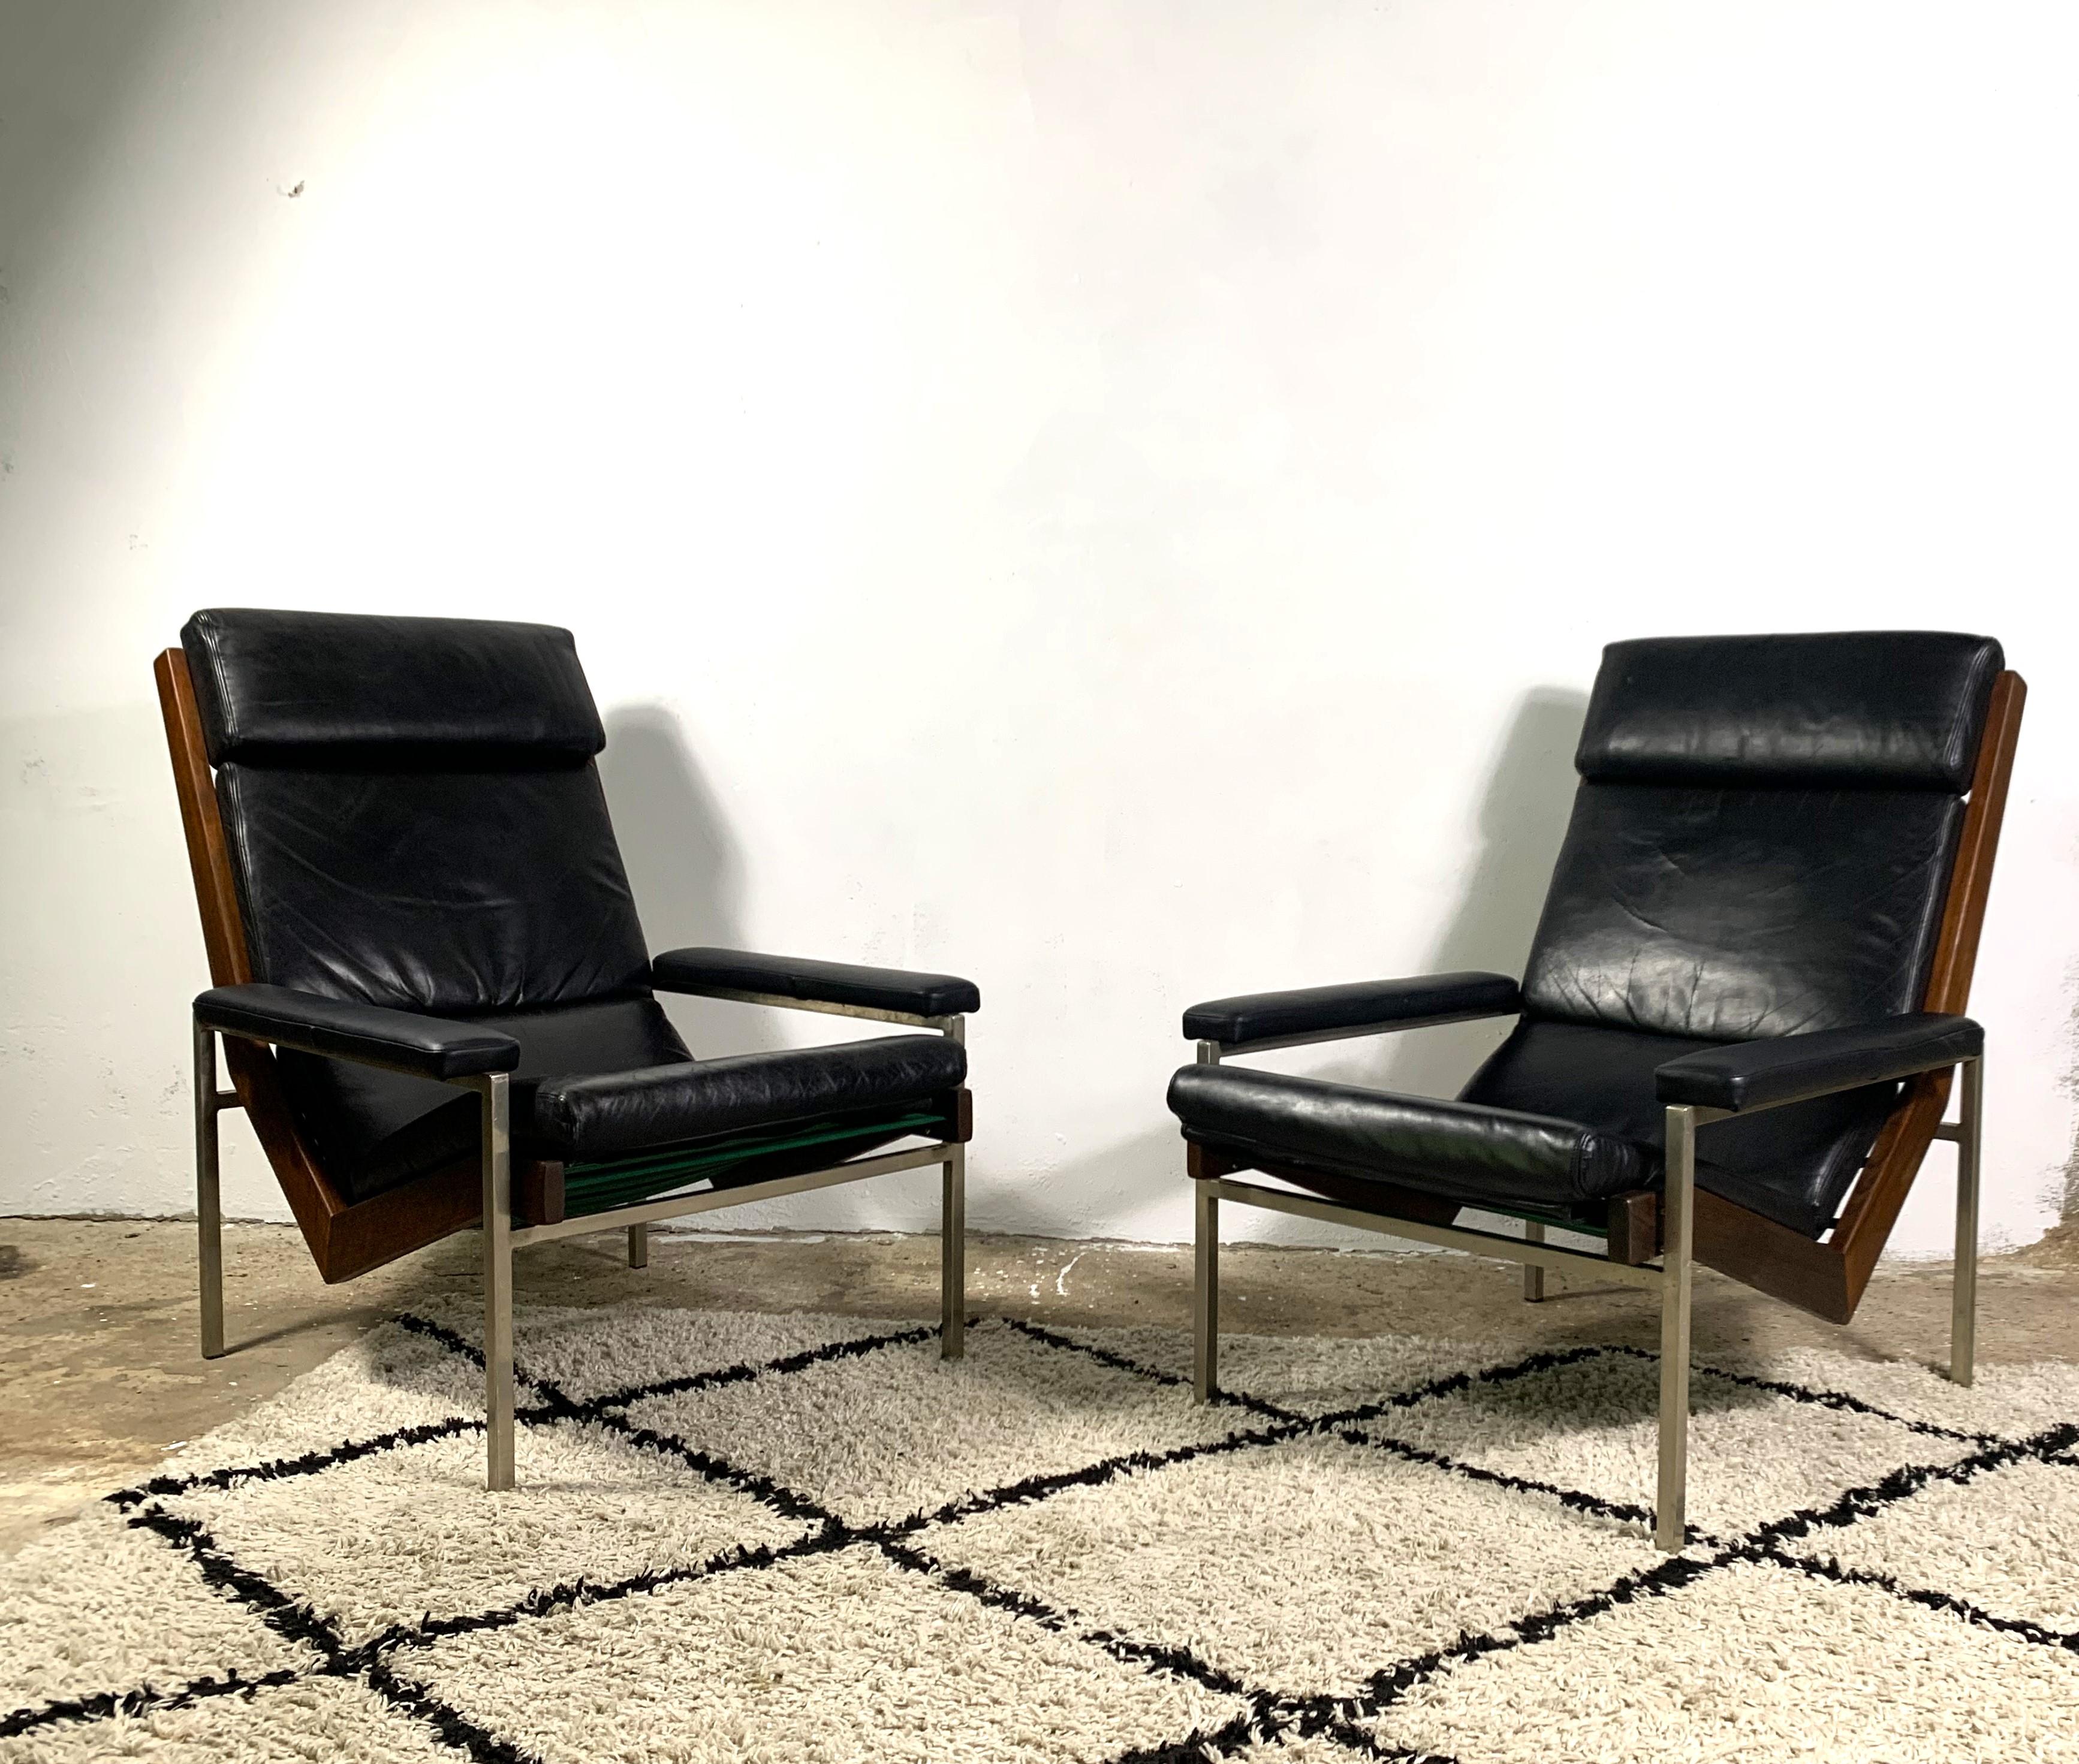 Lotus armchairs designed by Rob Parry for Gelderland. Metal construction and unique rosewood frame make the harmonious picture with the ergonomic black leather seat. Iconic design of one of the best Dutch classic designers.